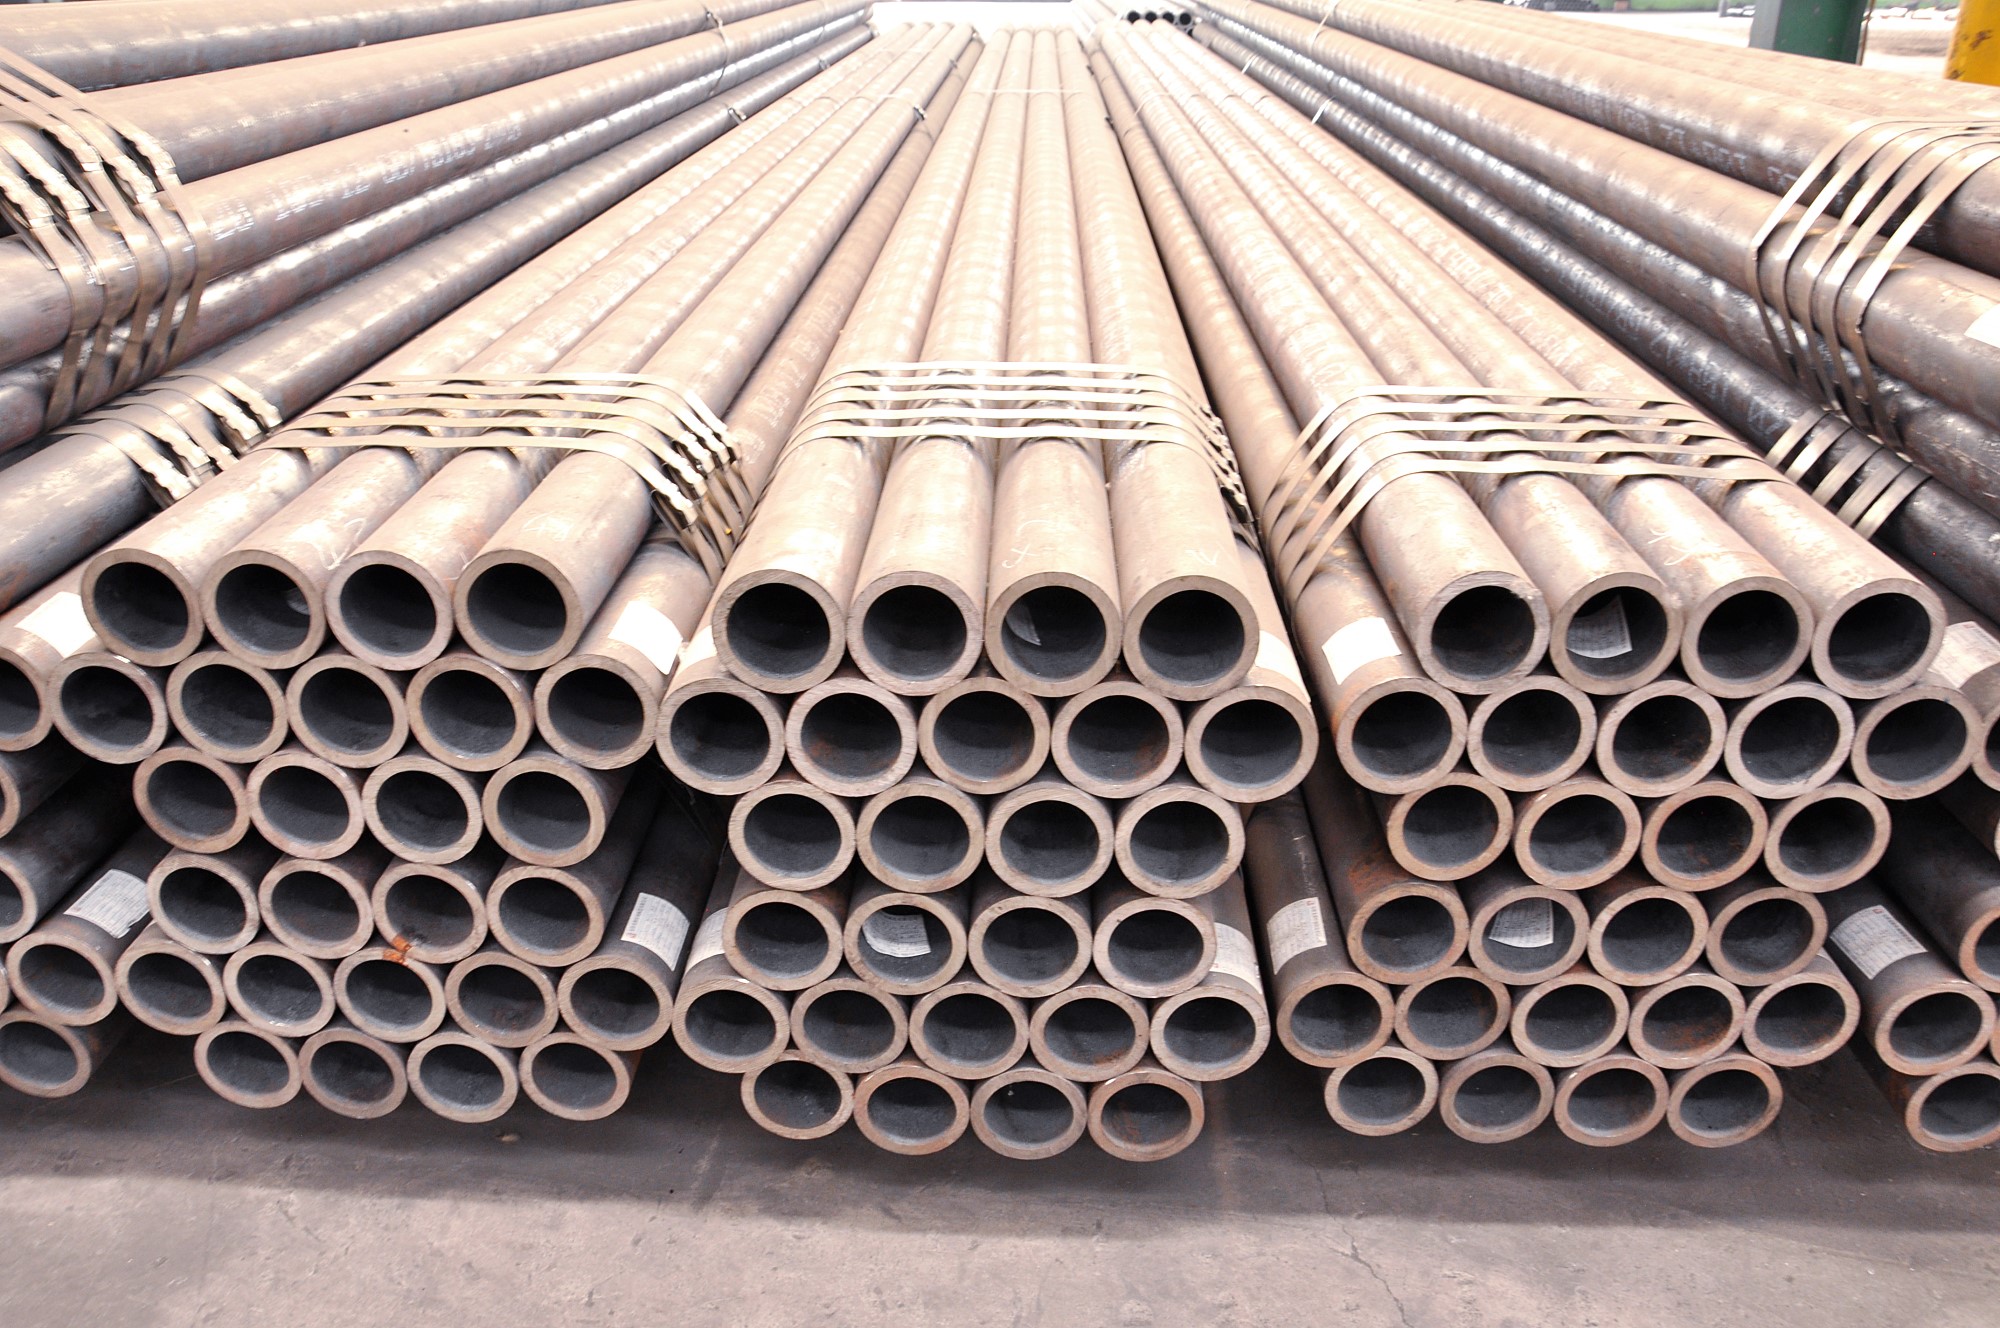 Grade Q345 Liquid Delivery Seamless Steel Pipes Introduction